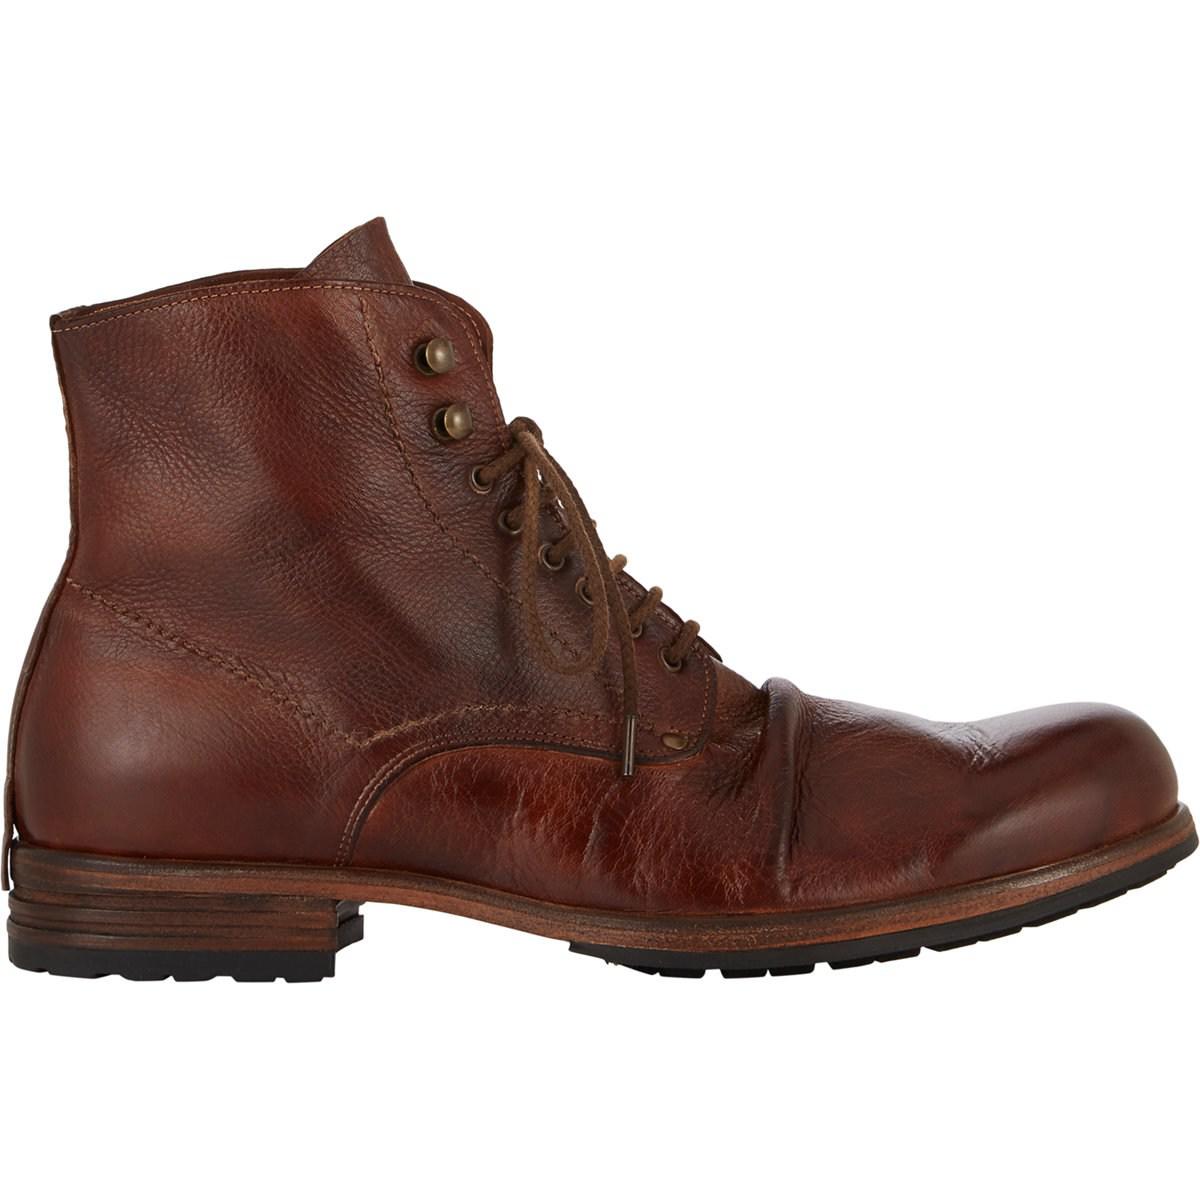 Lyst - Shoto Wrinkled Boots in Brown for Men